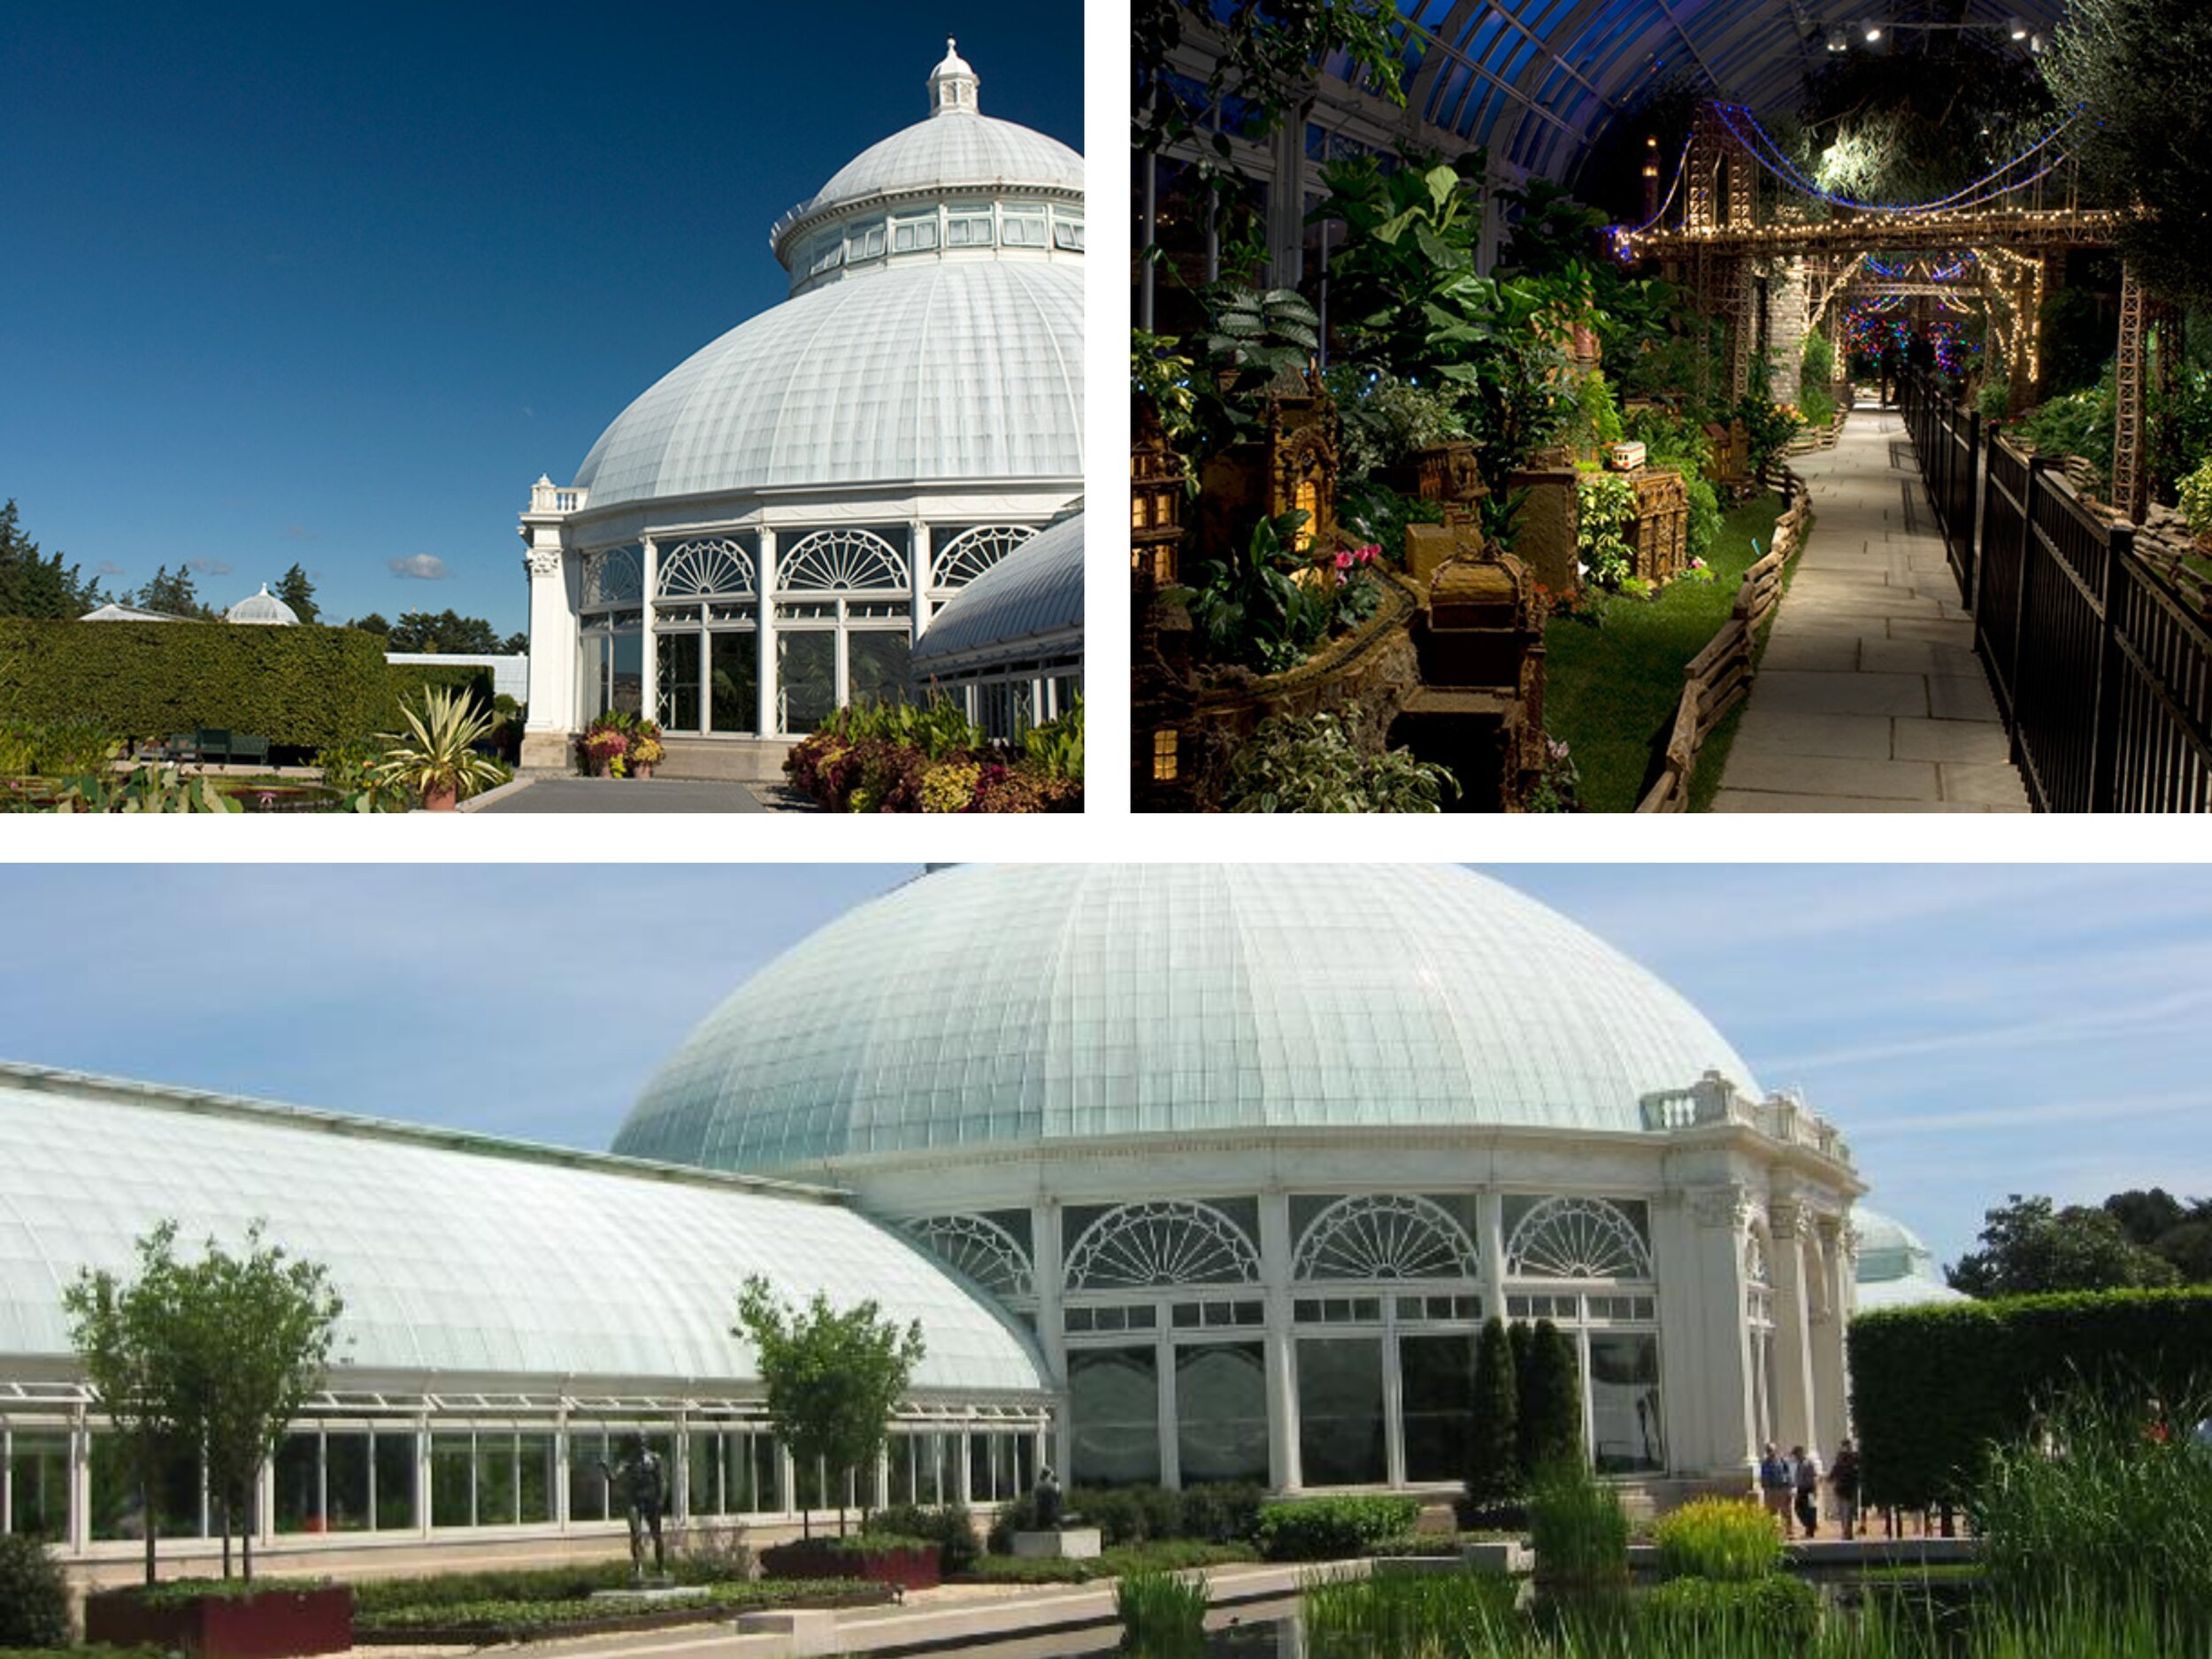 Enid A. Haupt Conservatory at The New York Botanical Garden